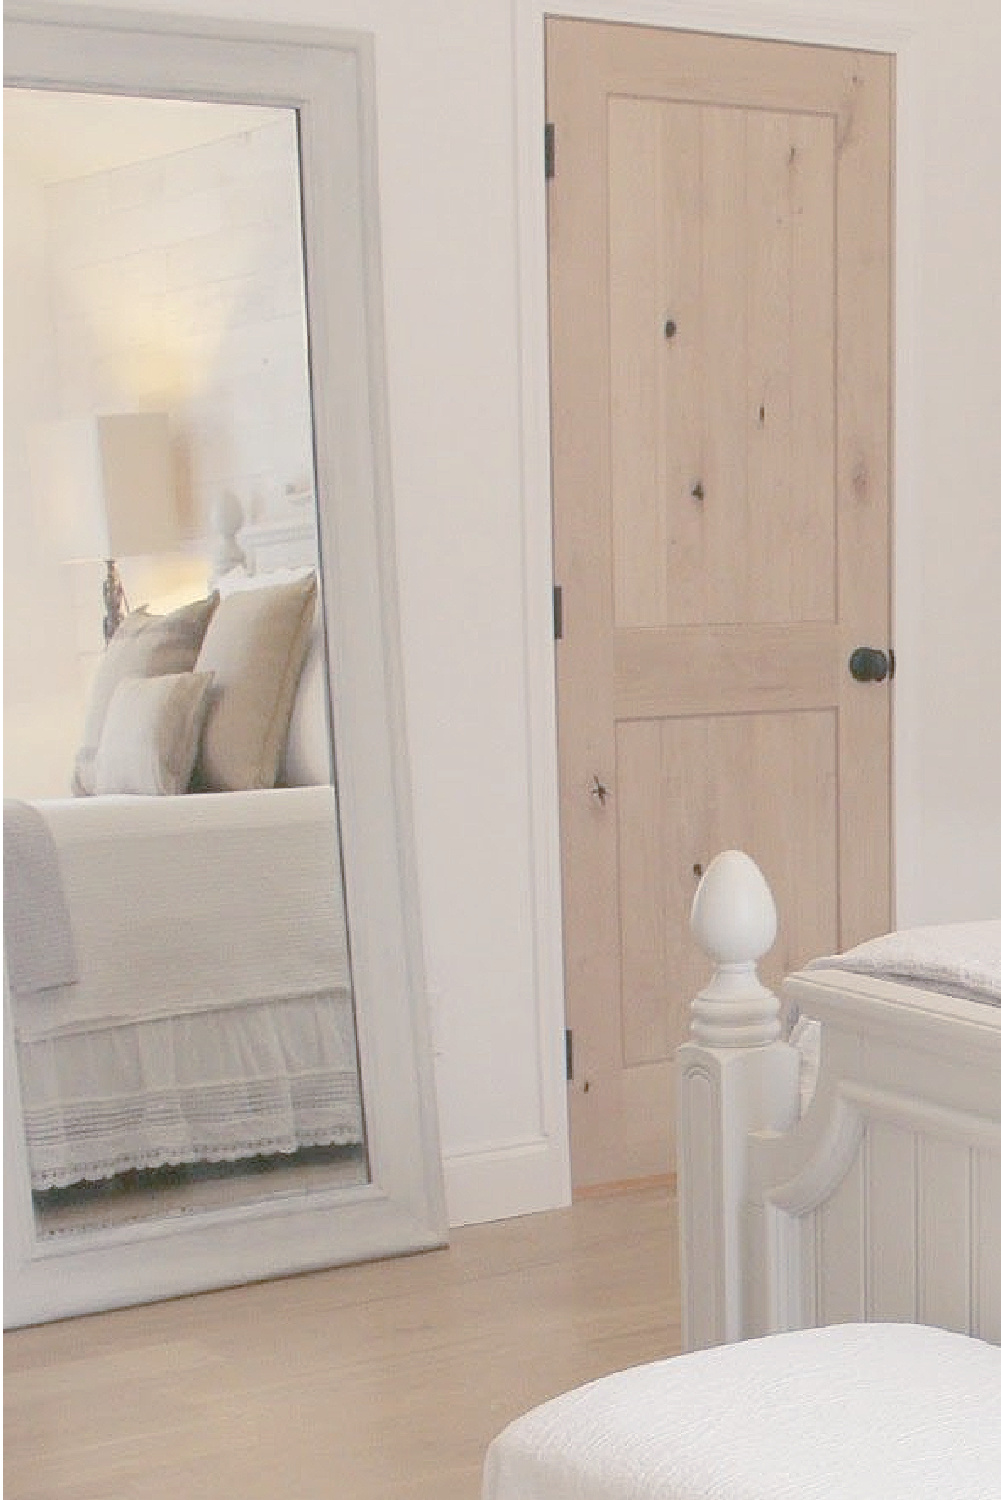 Rustic knotty alder doors and bright white walls in our serene bedroom with romantic European country style - Hello Lovely Studio. #europeancountry #alderdoors #serenebedroom